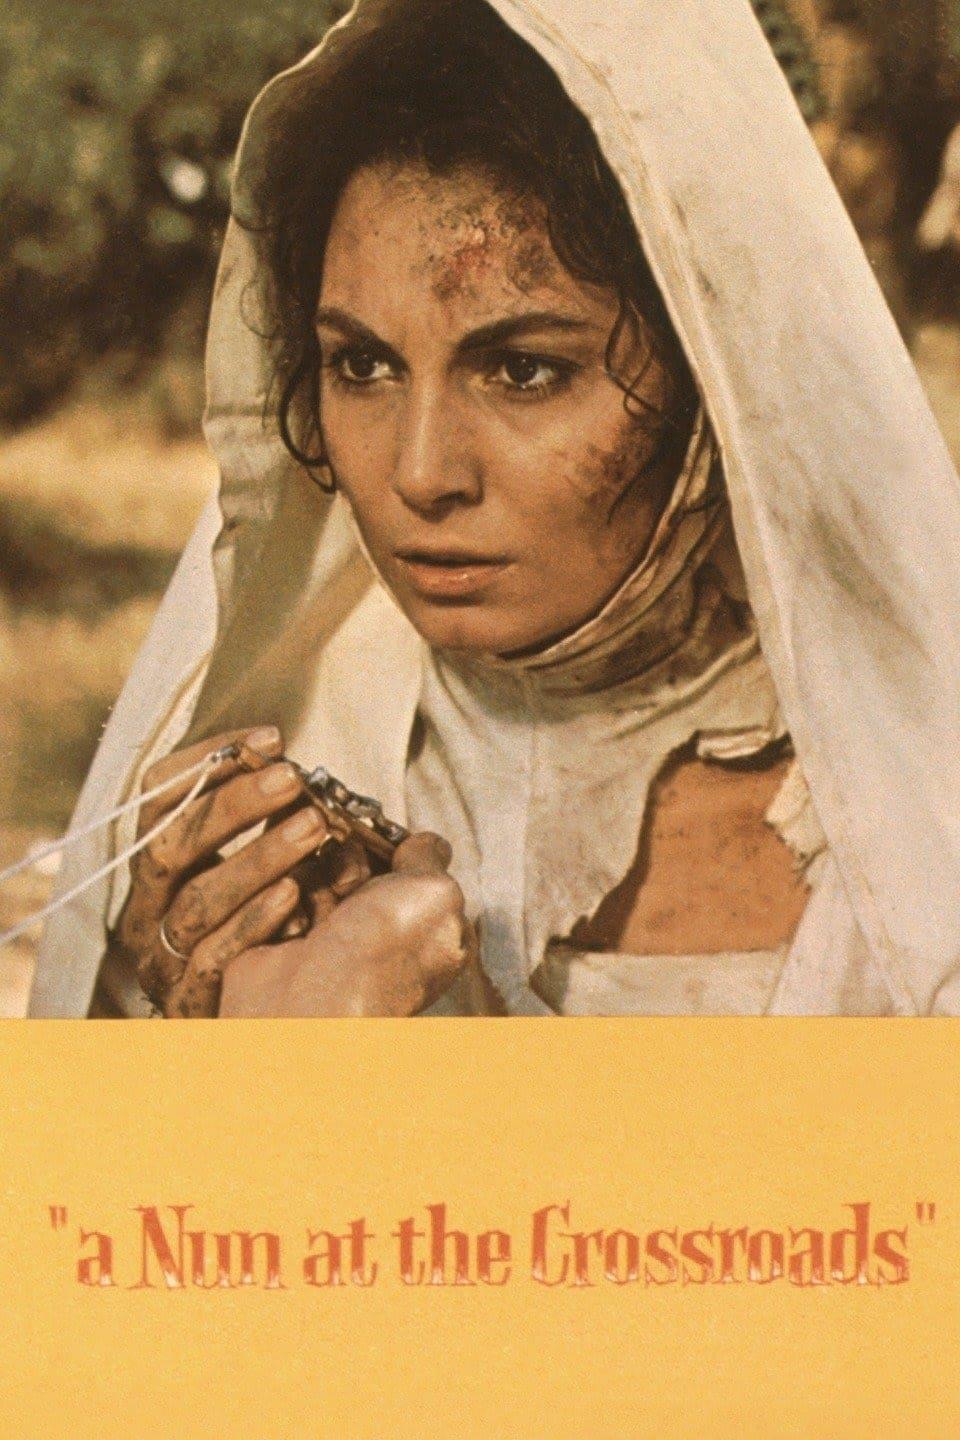 A Nun at the Crossroads poster